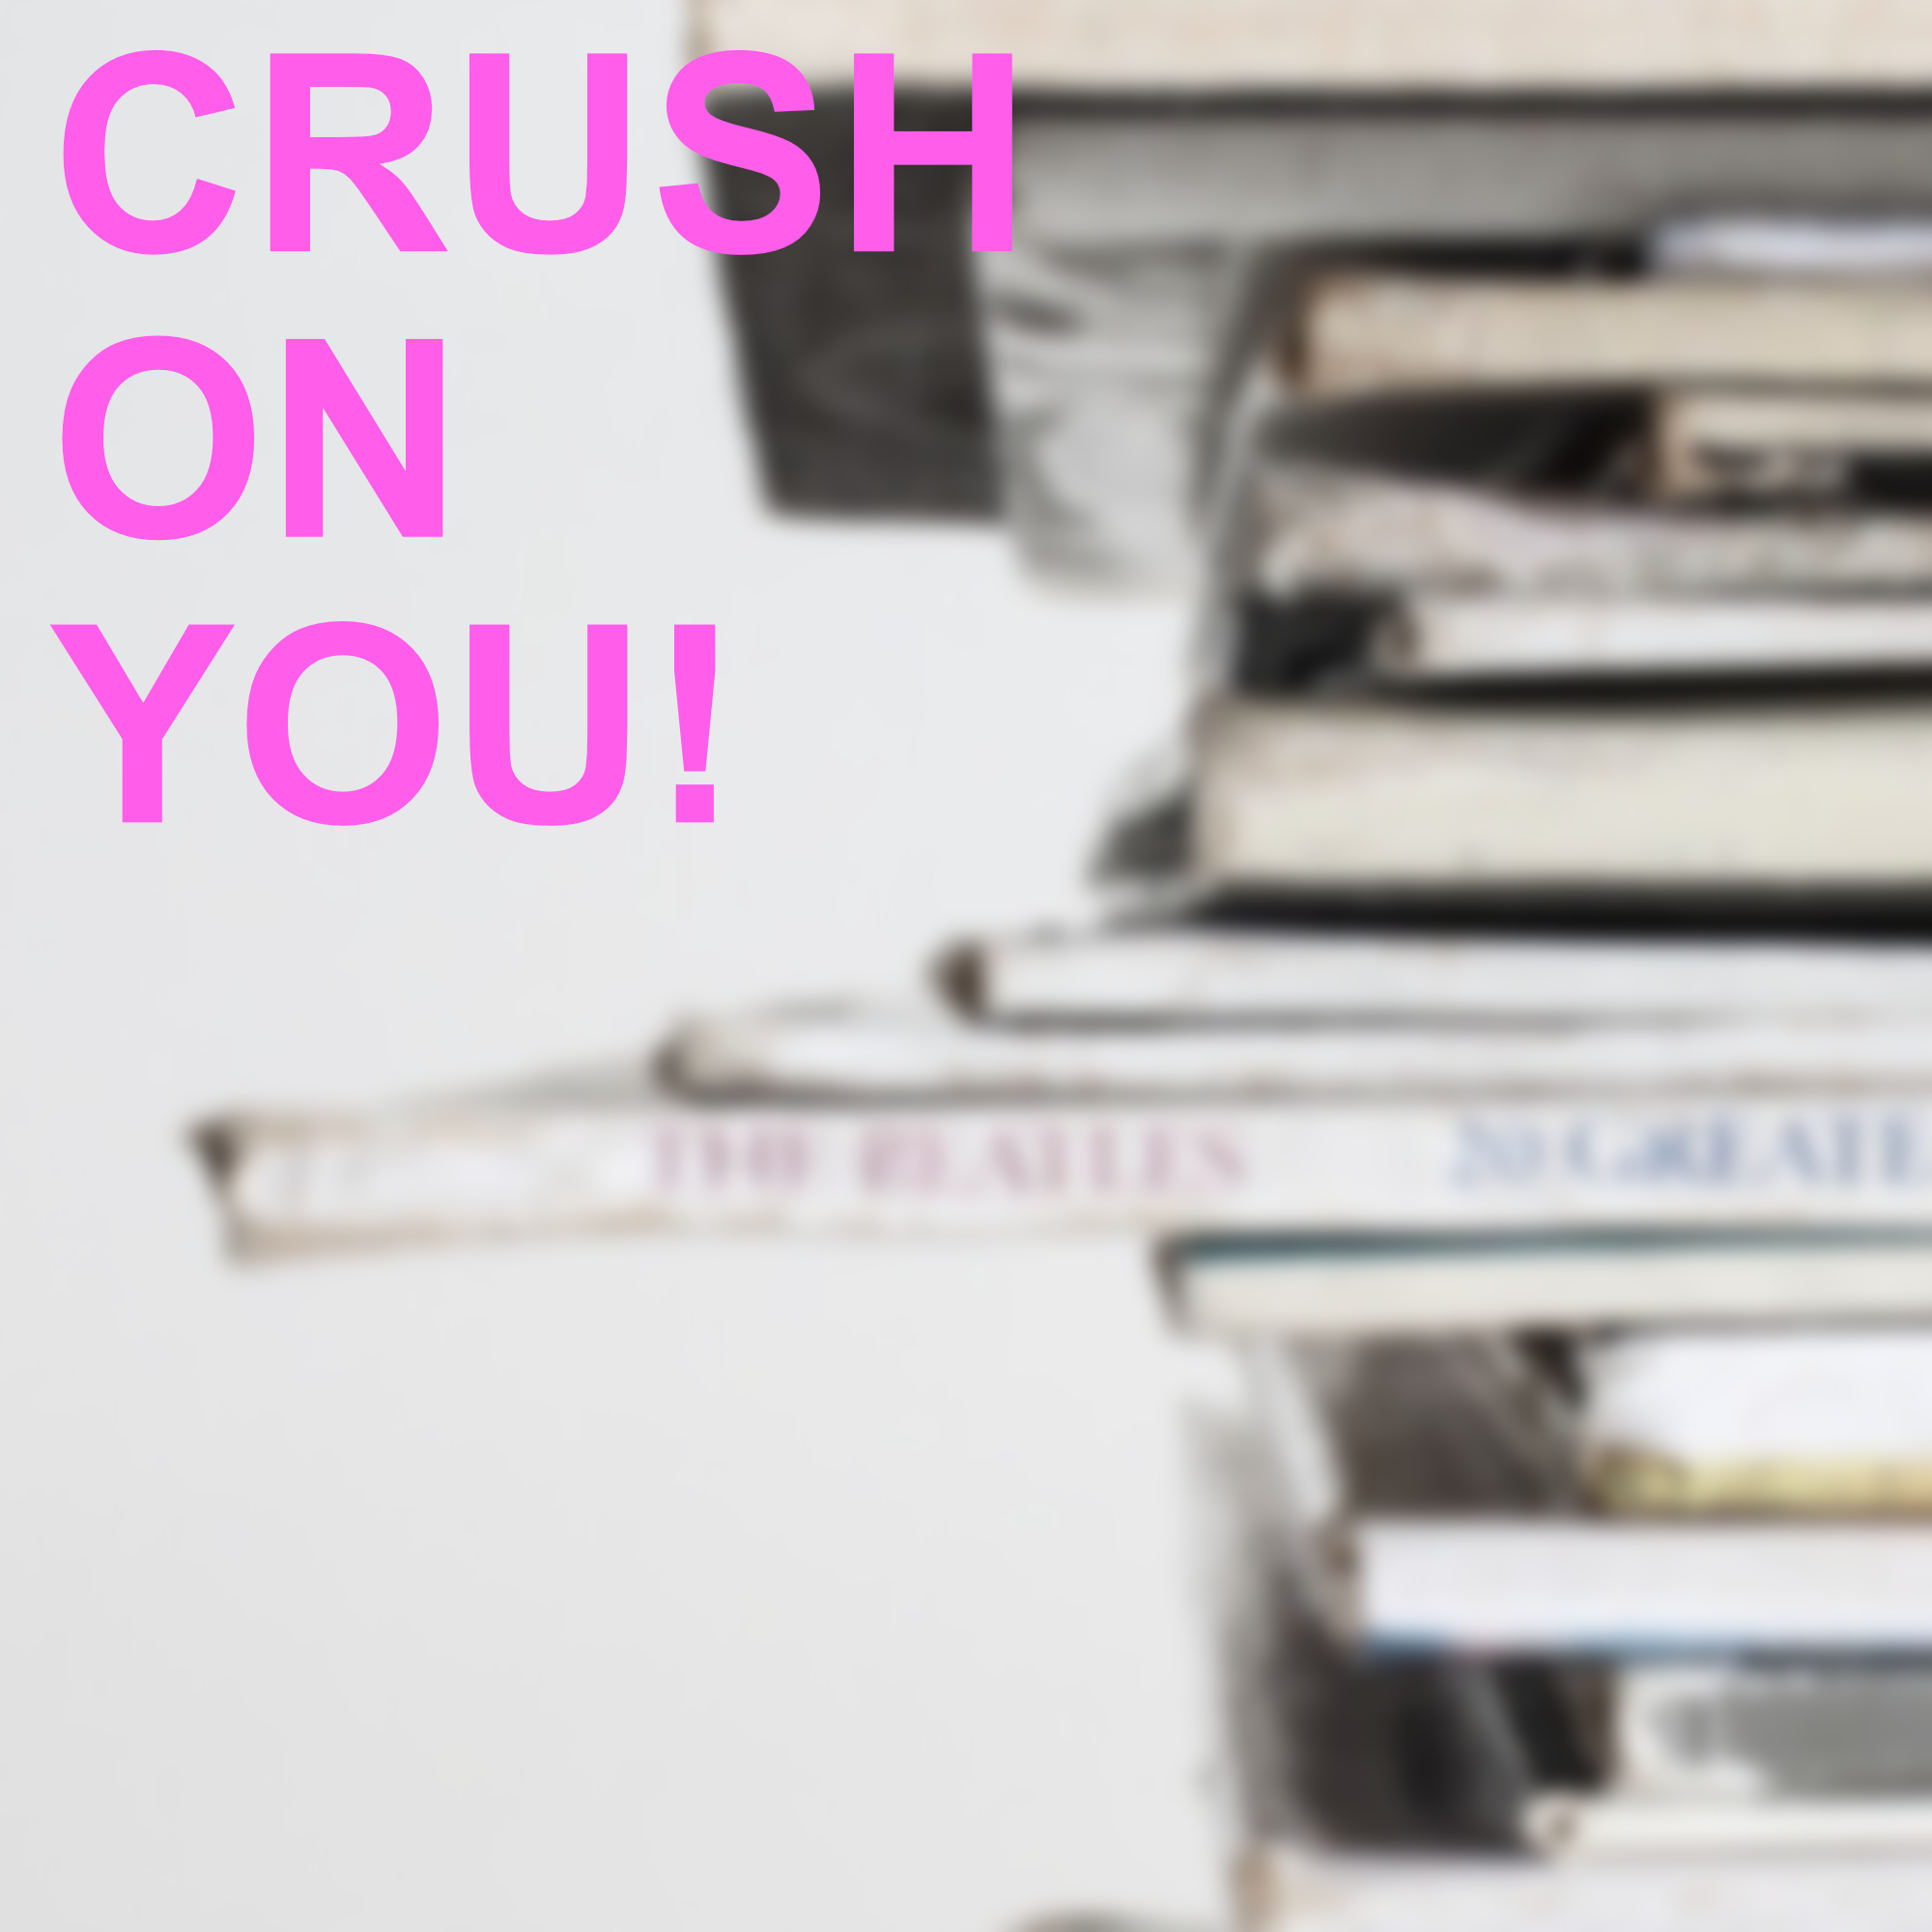 Crush on You!